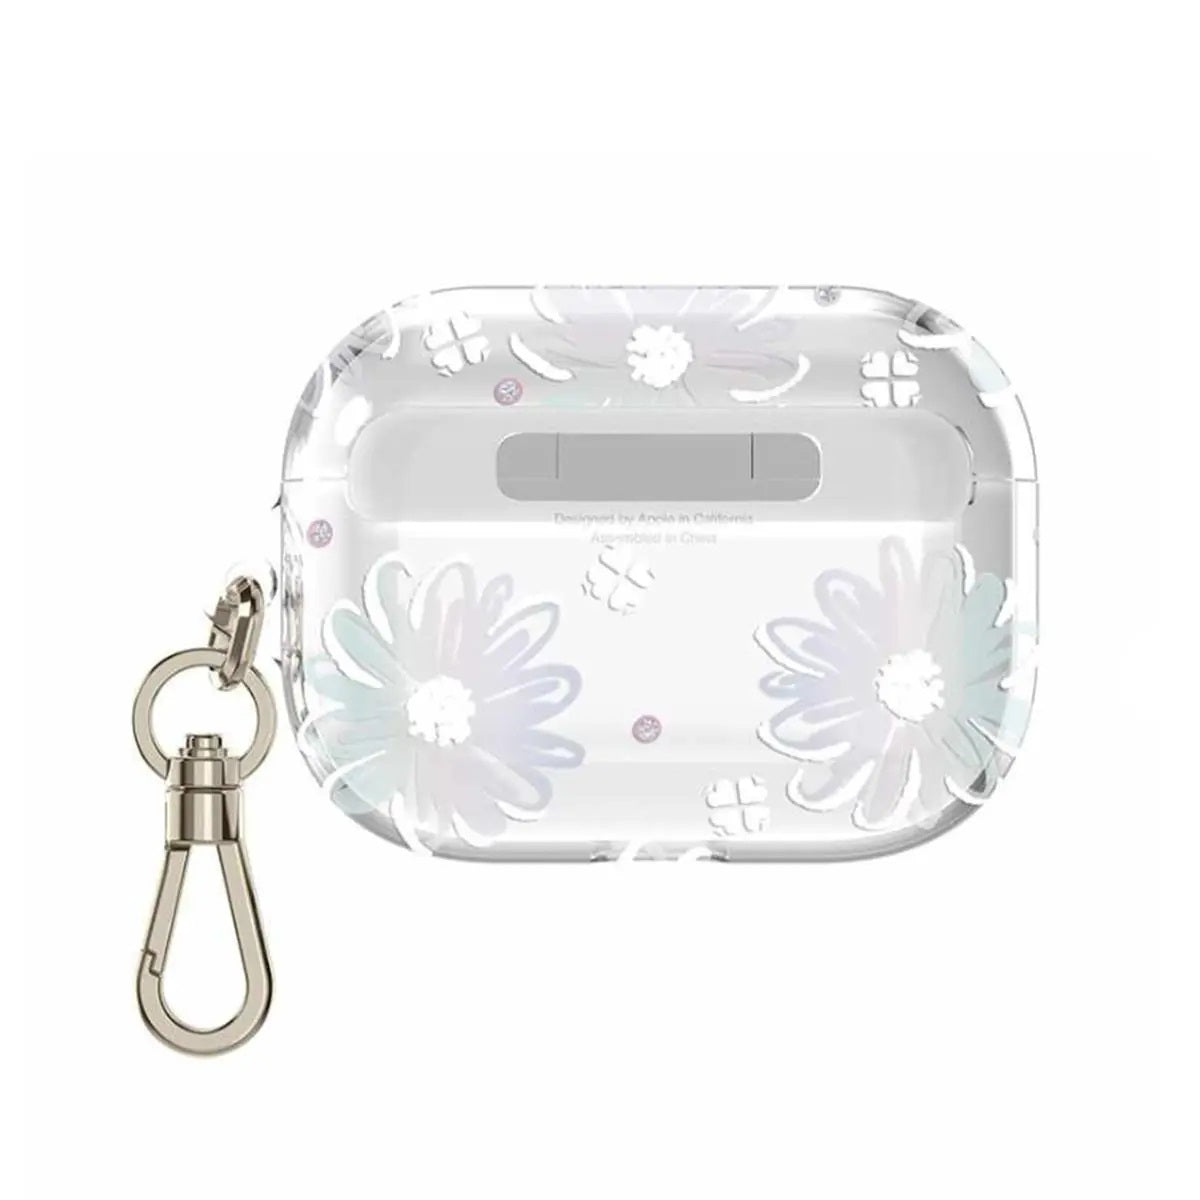 Kate Spade New York Protective AirPods Pro Case (Daisy Iridescent Foil/White/Clear)